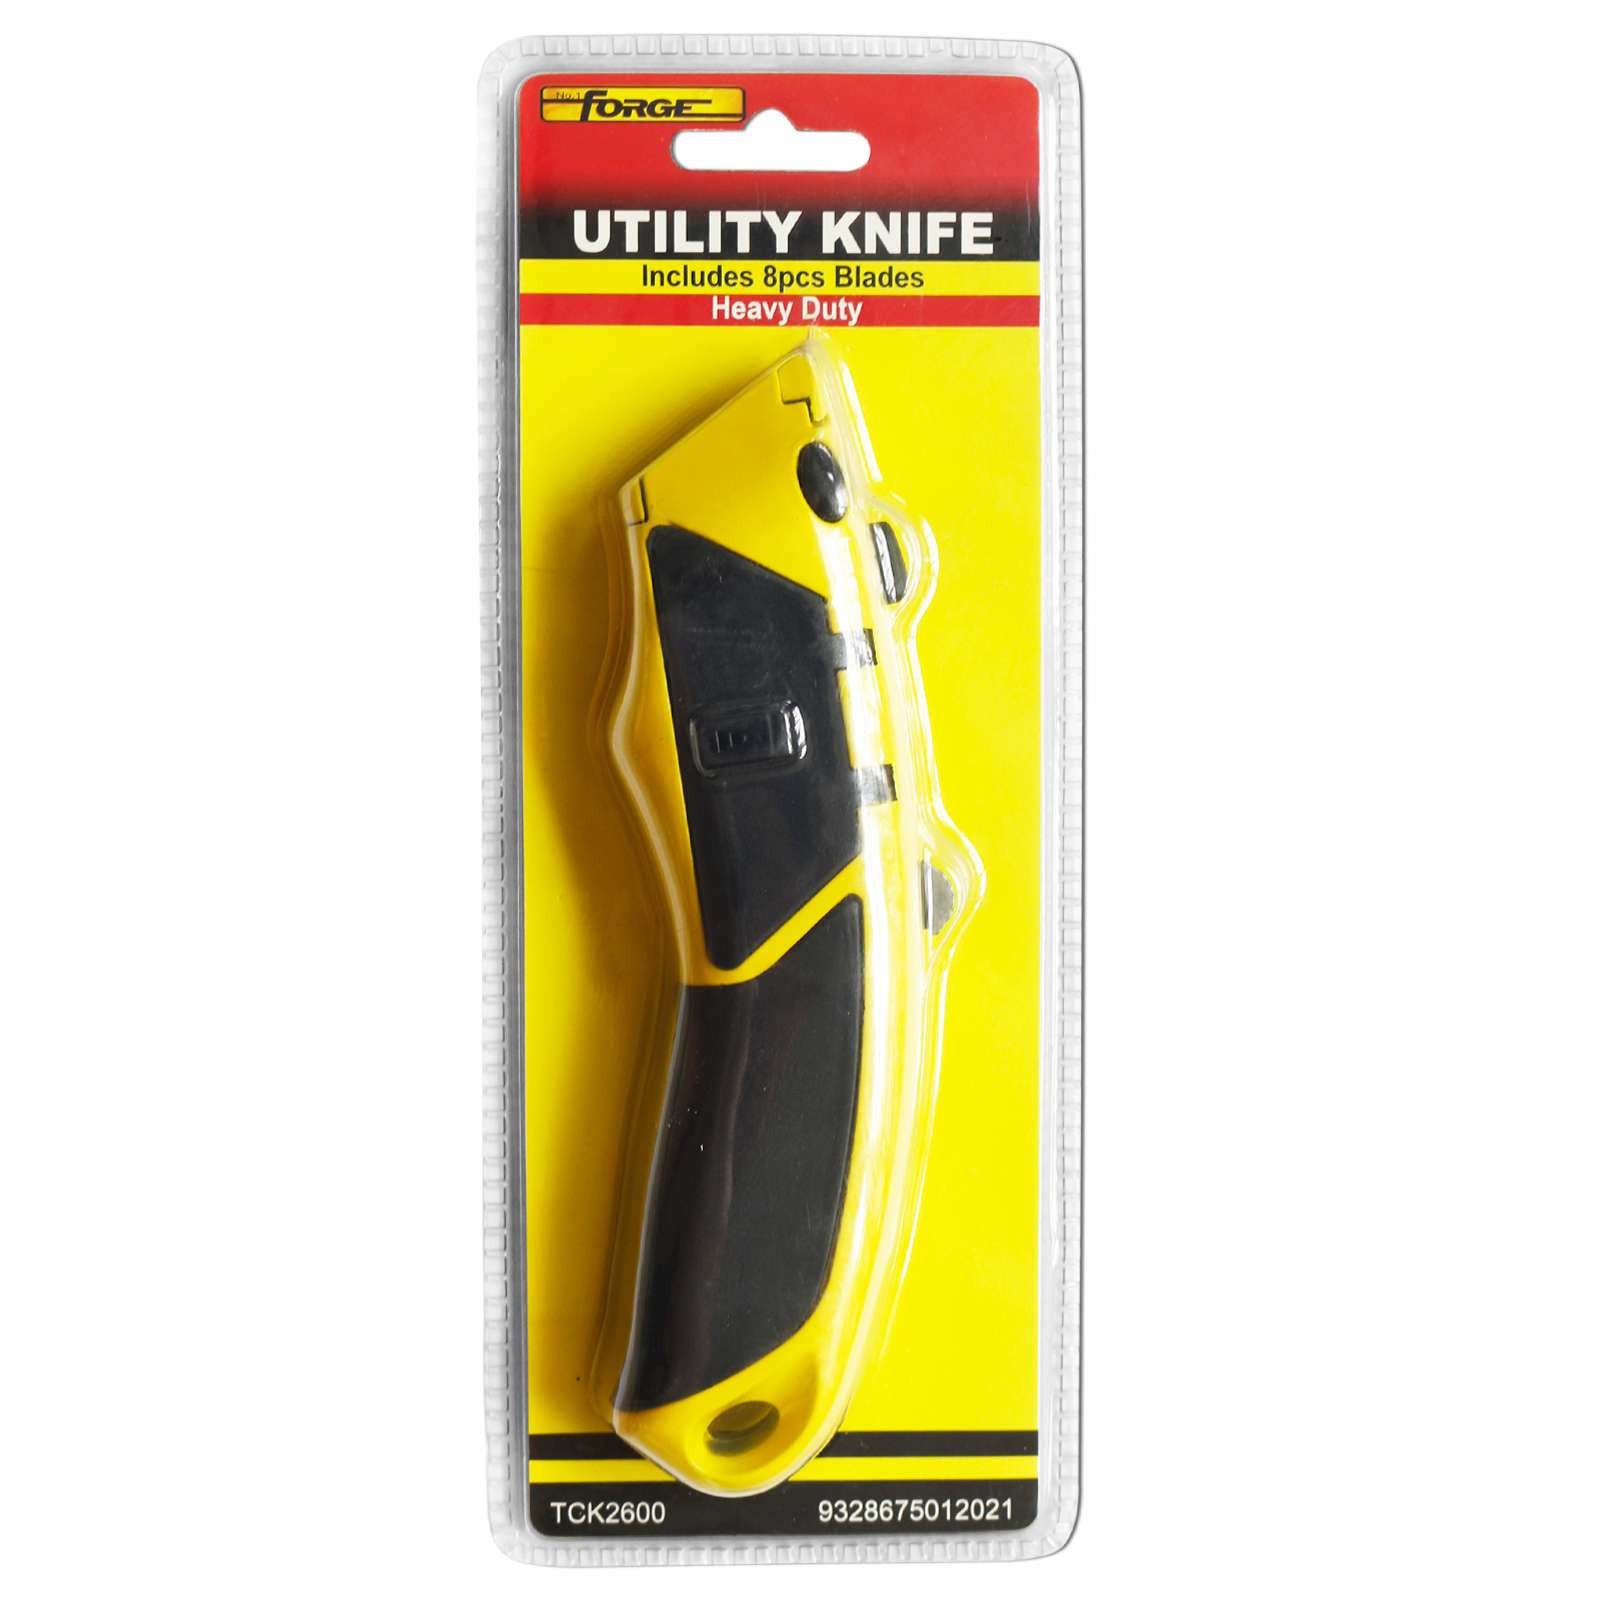 Heavy Duty Utility Knife with Auto Reload 8 Blades - 3